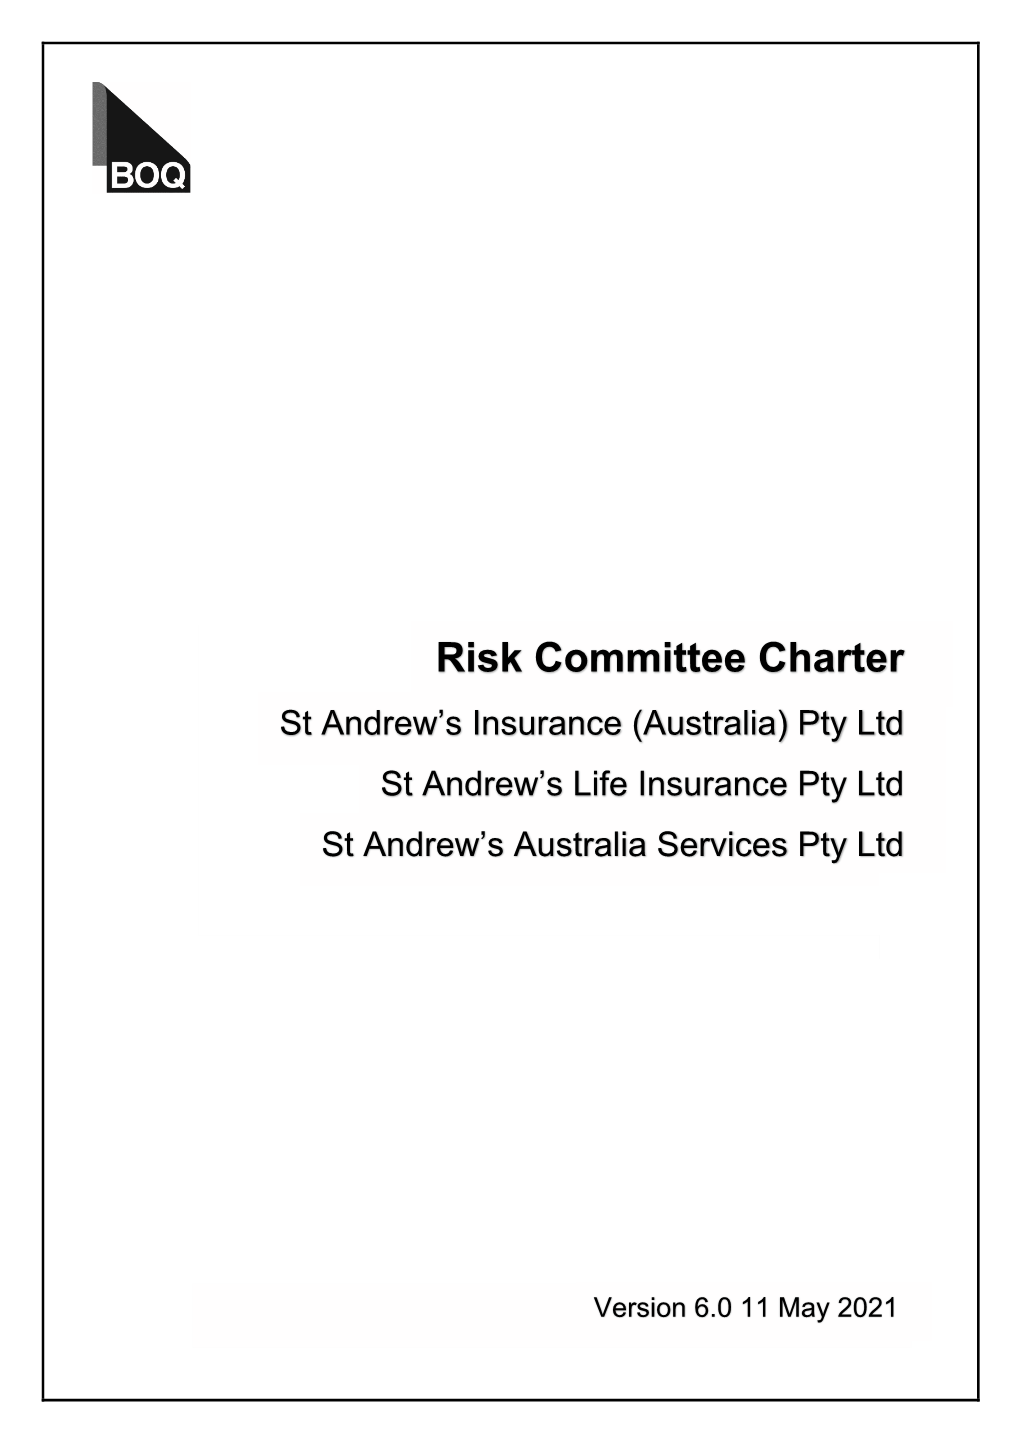 St Andrew's Group Risk Committee Charter